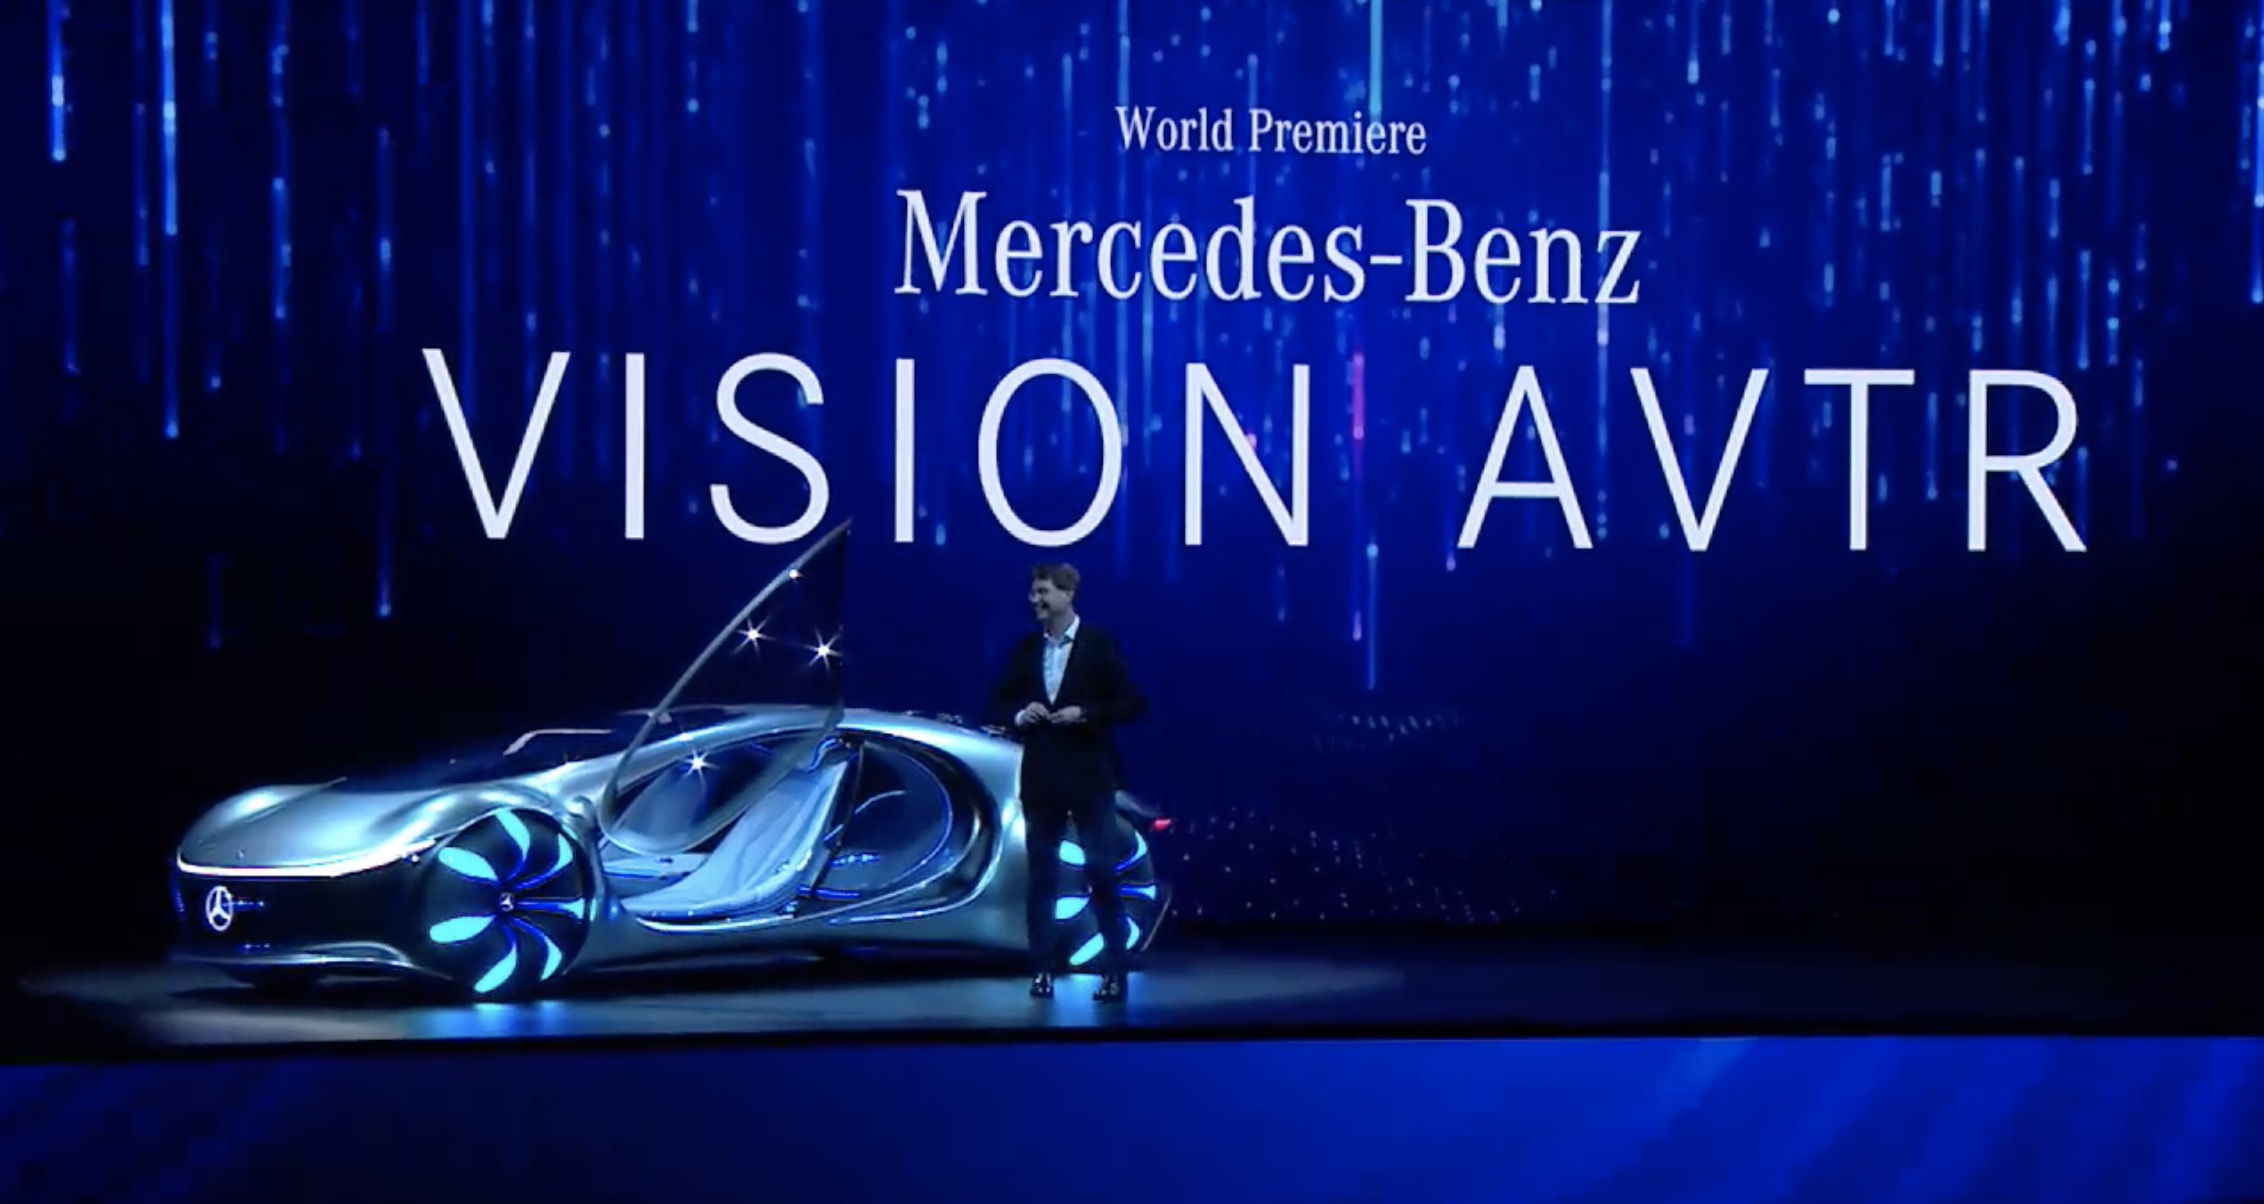 We Drive the MercedesBenz Vision AVTR Concept Car from Avatar